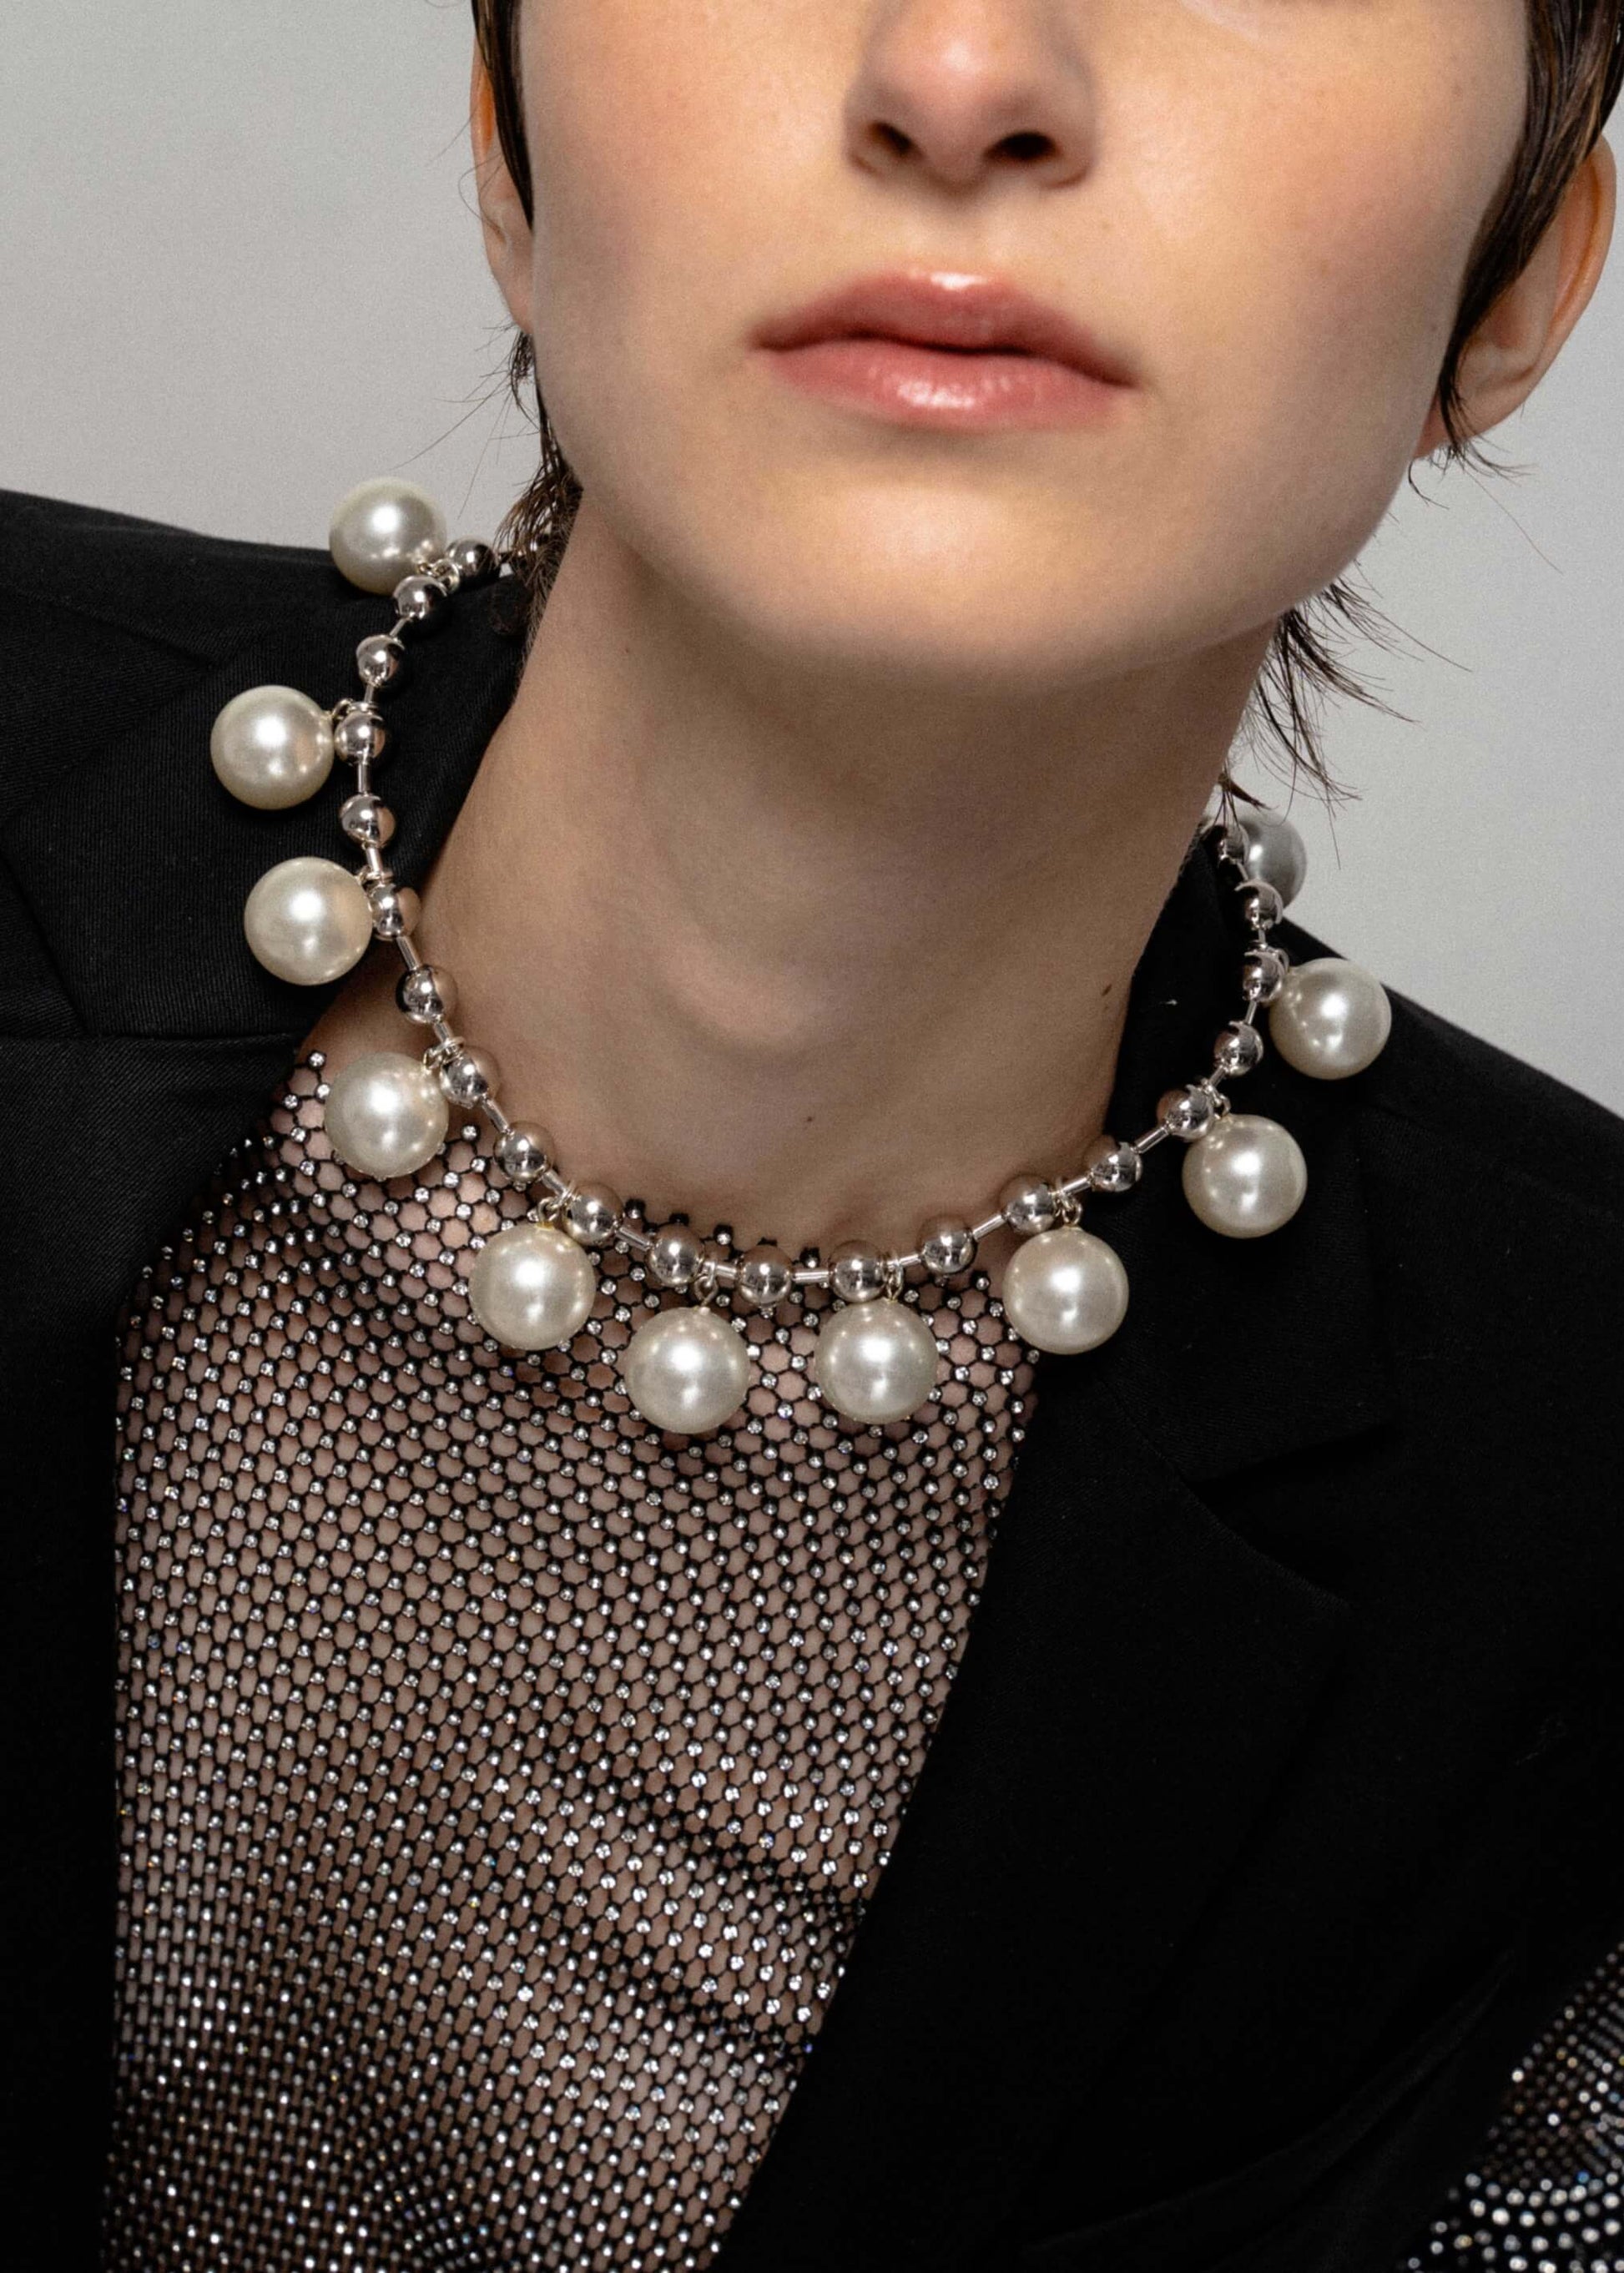 Bellatrix necklace: rhodium-plated chain, resin pearl pendants. Fast shipping. 